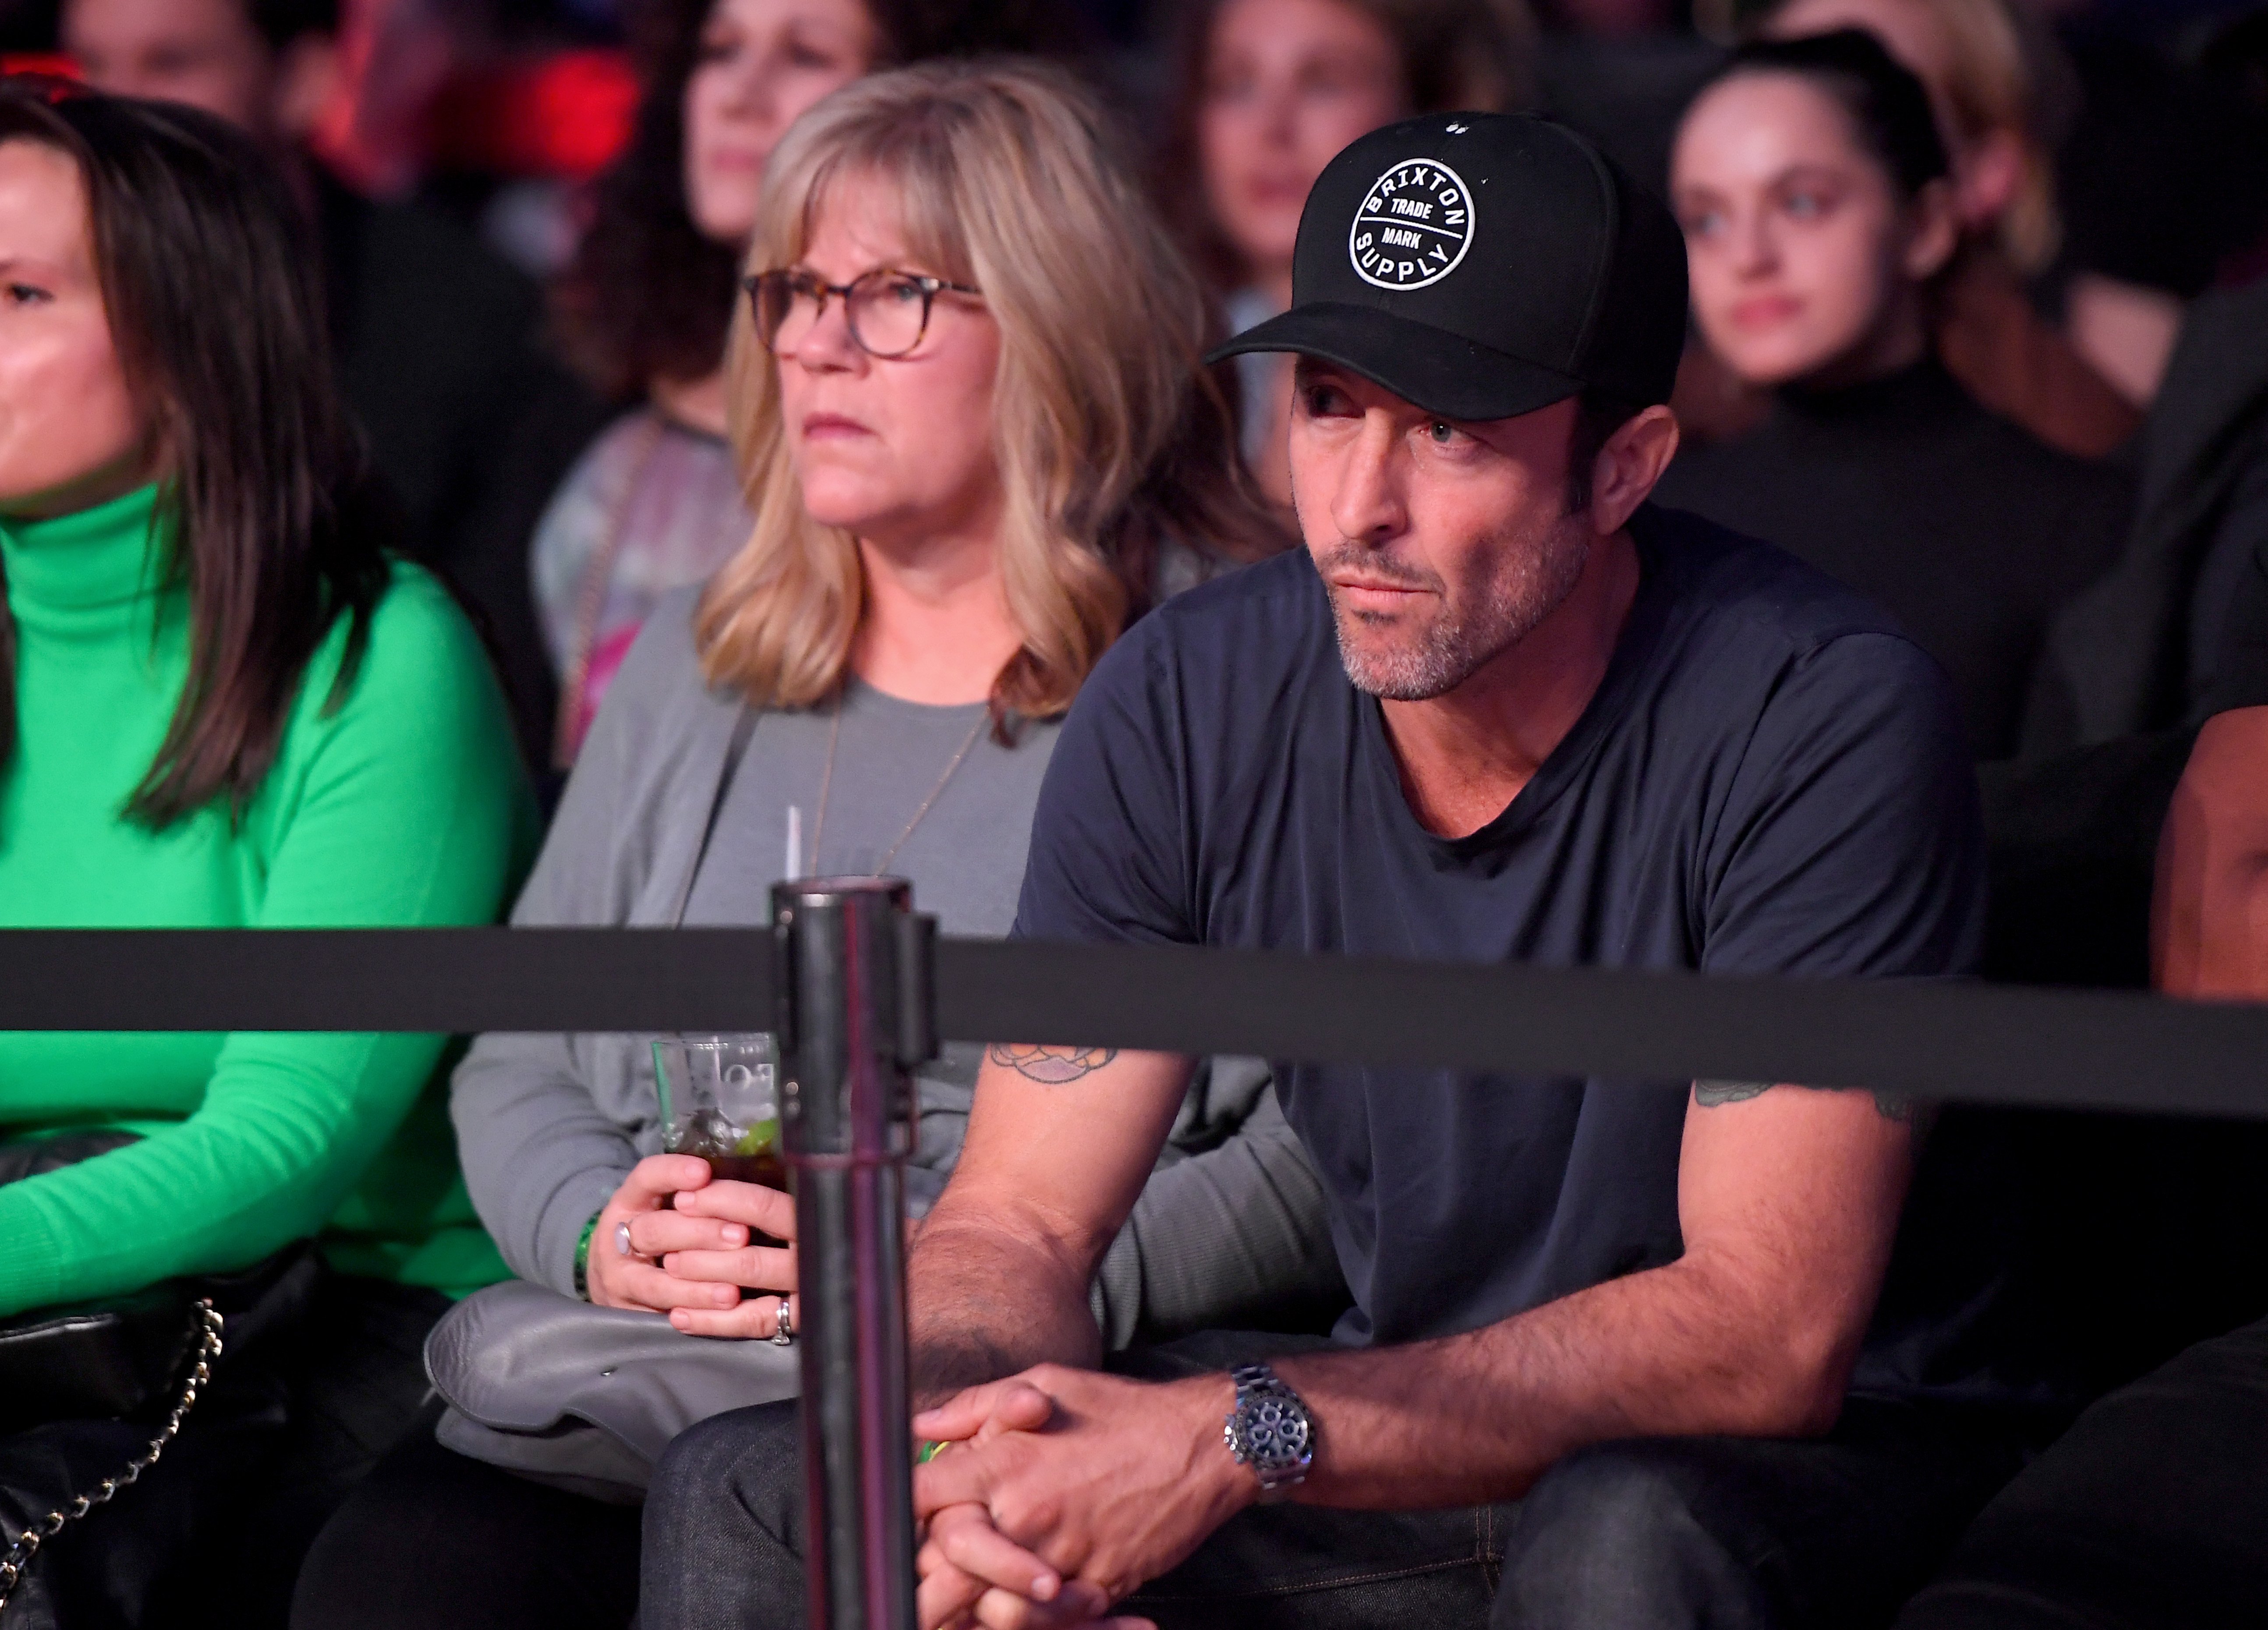 Alex O'Loughlin at Bellator 238 on January 25, 2020 in California. | Source: Getty Images